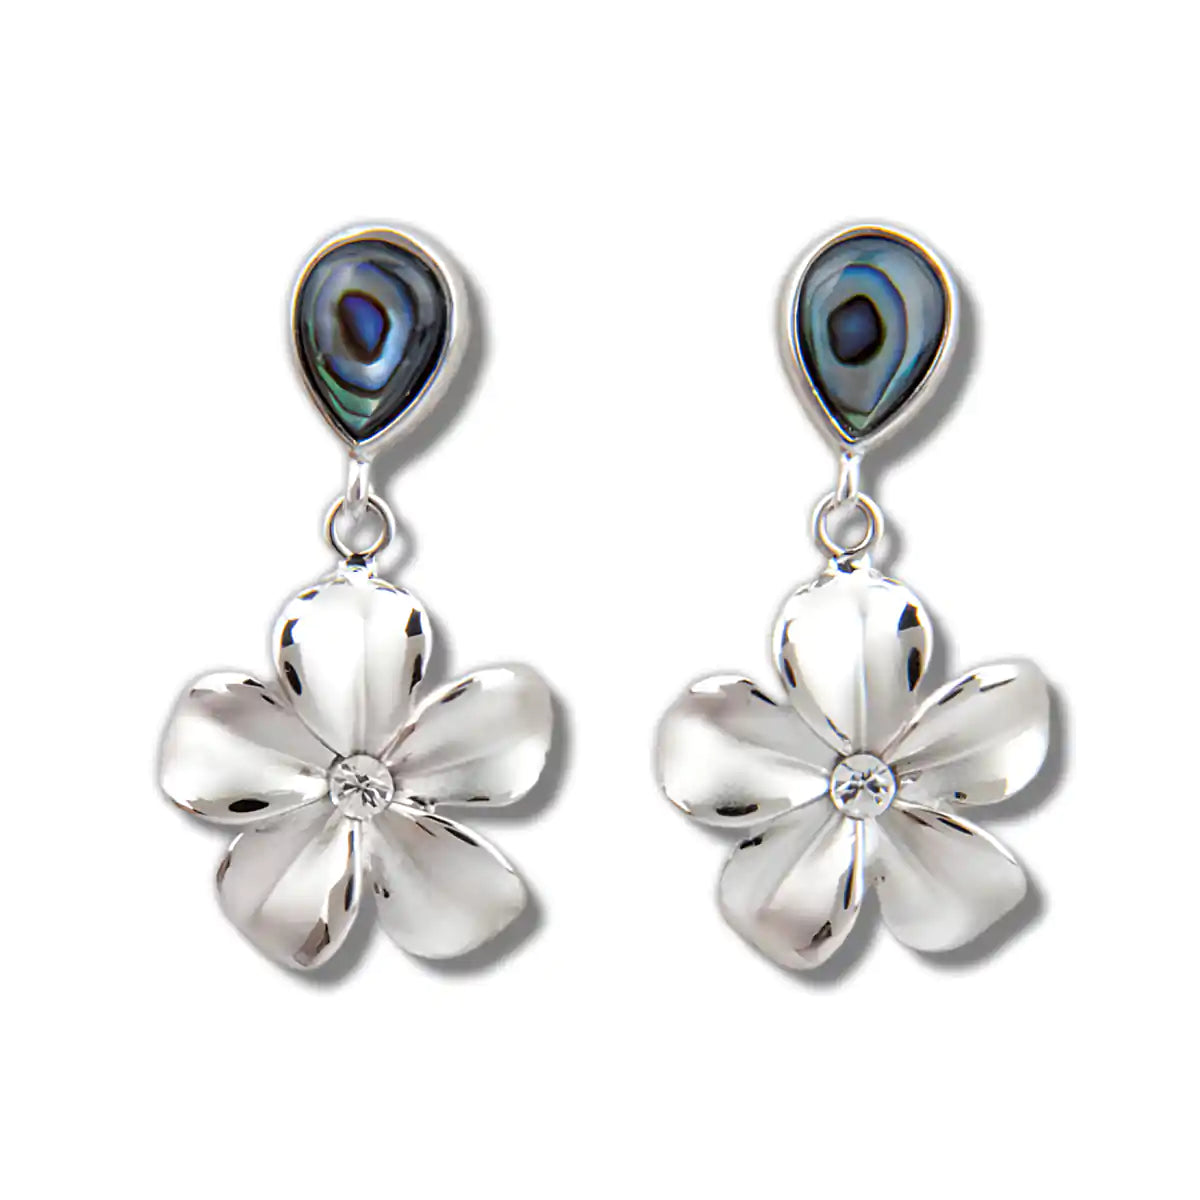 Glacier pearle forget-me-not earrings